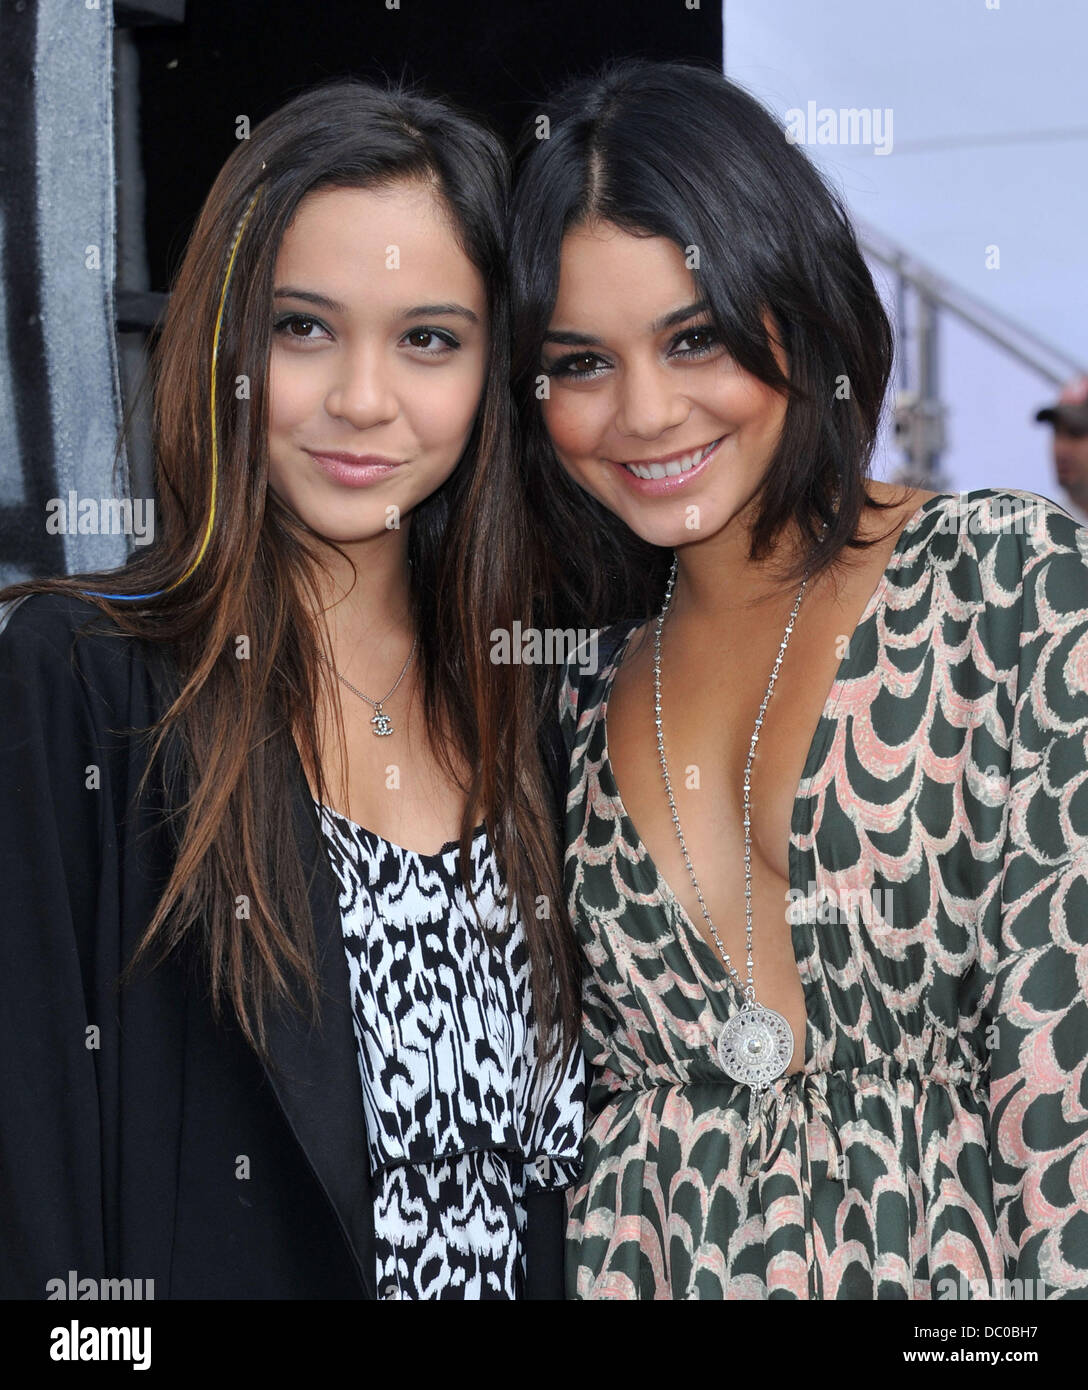 Vanessa Hudgens and her sister Stella Hudgens The Cirque Du Soleil world premiere of 'Iris: A Journey Into The World Of Cinema' held at the Kodak Theatre Los Angeles, California - 25.09.11 Stock Photo